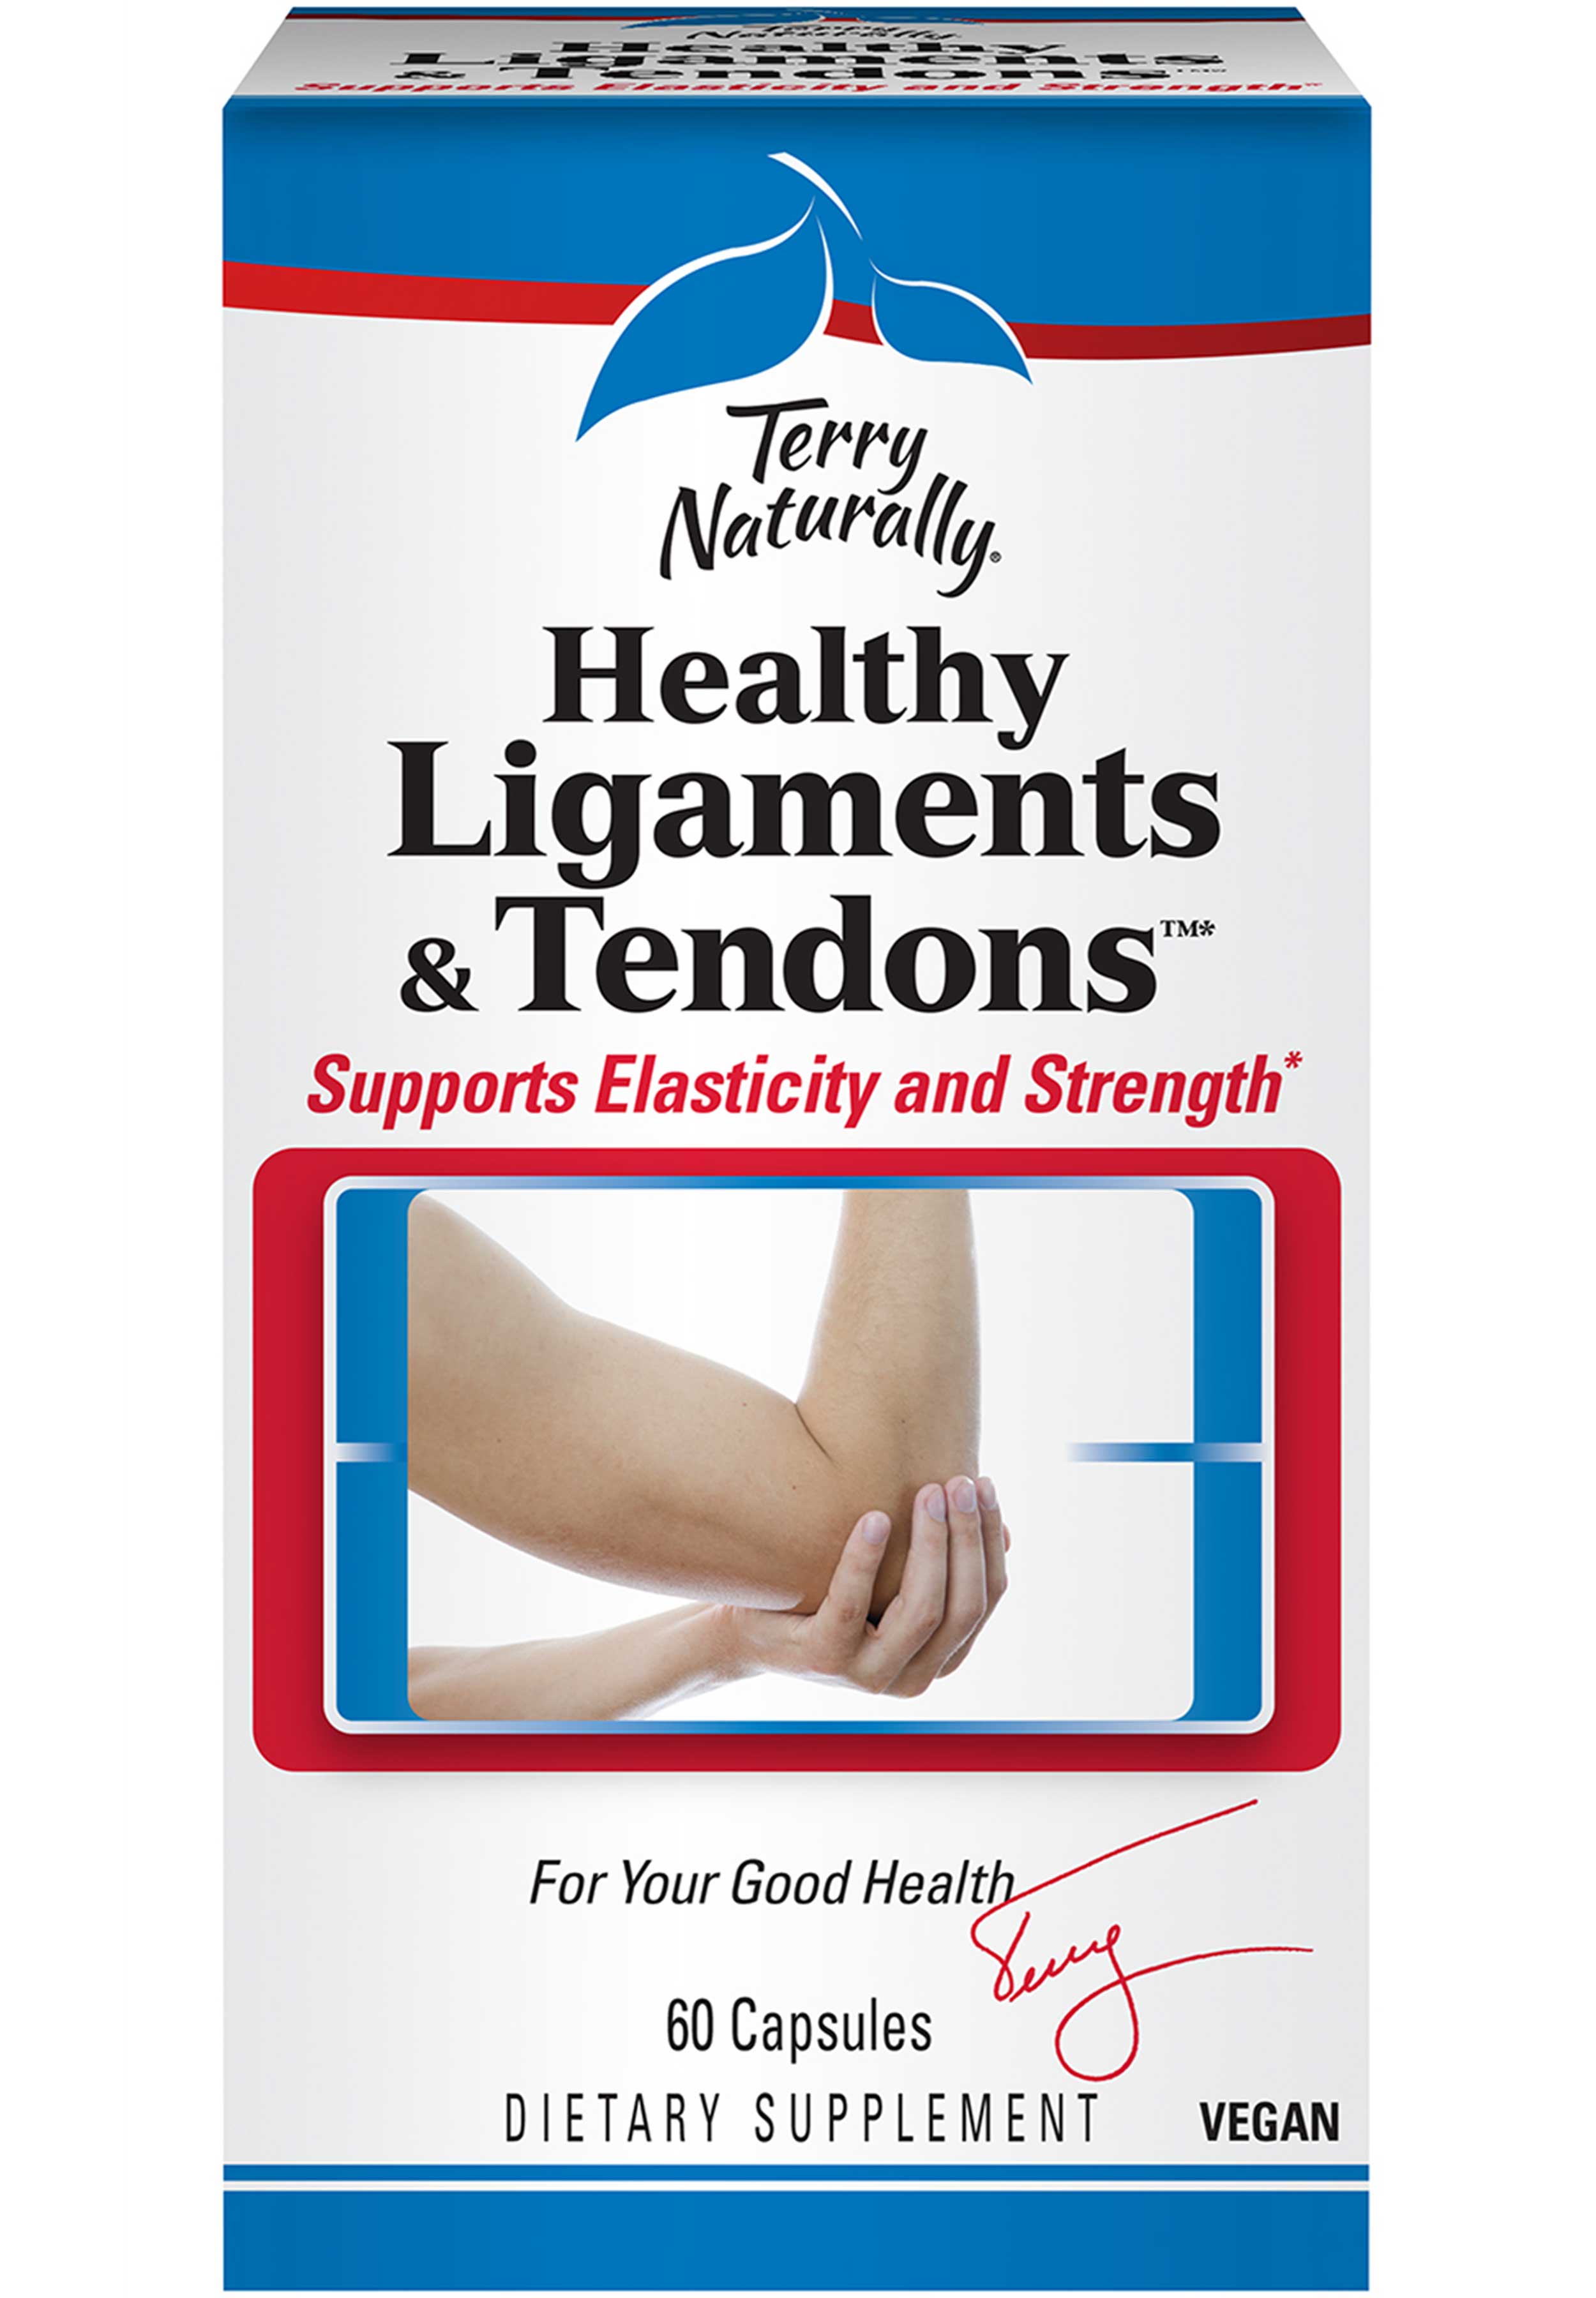 Terry Naturally Healthy Ligaments & Tendons